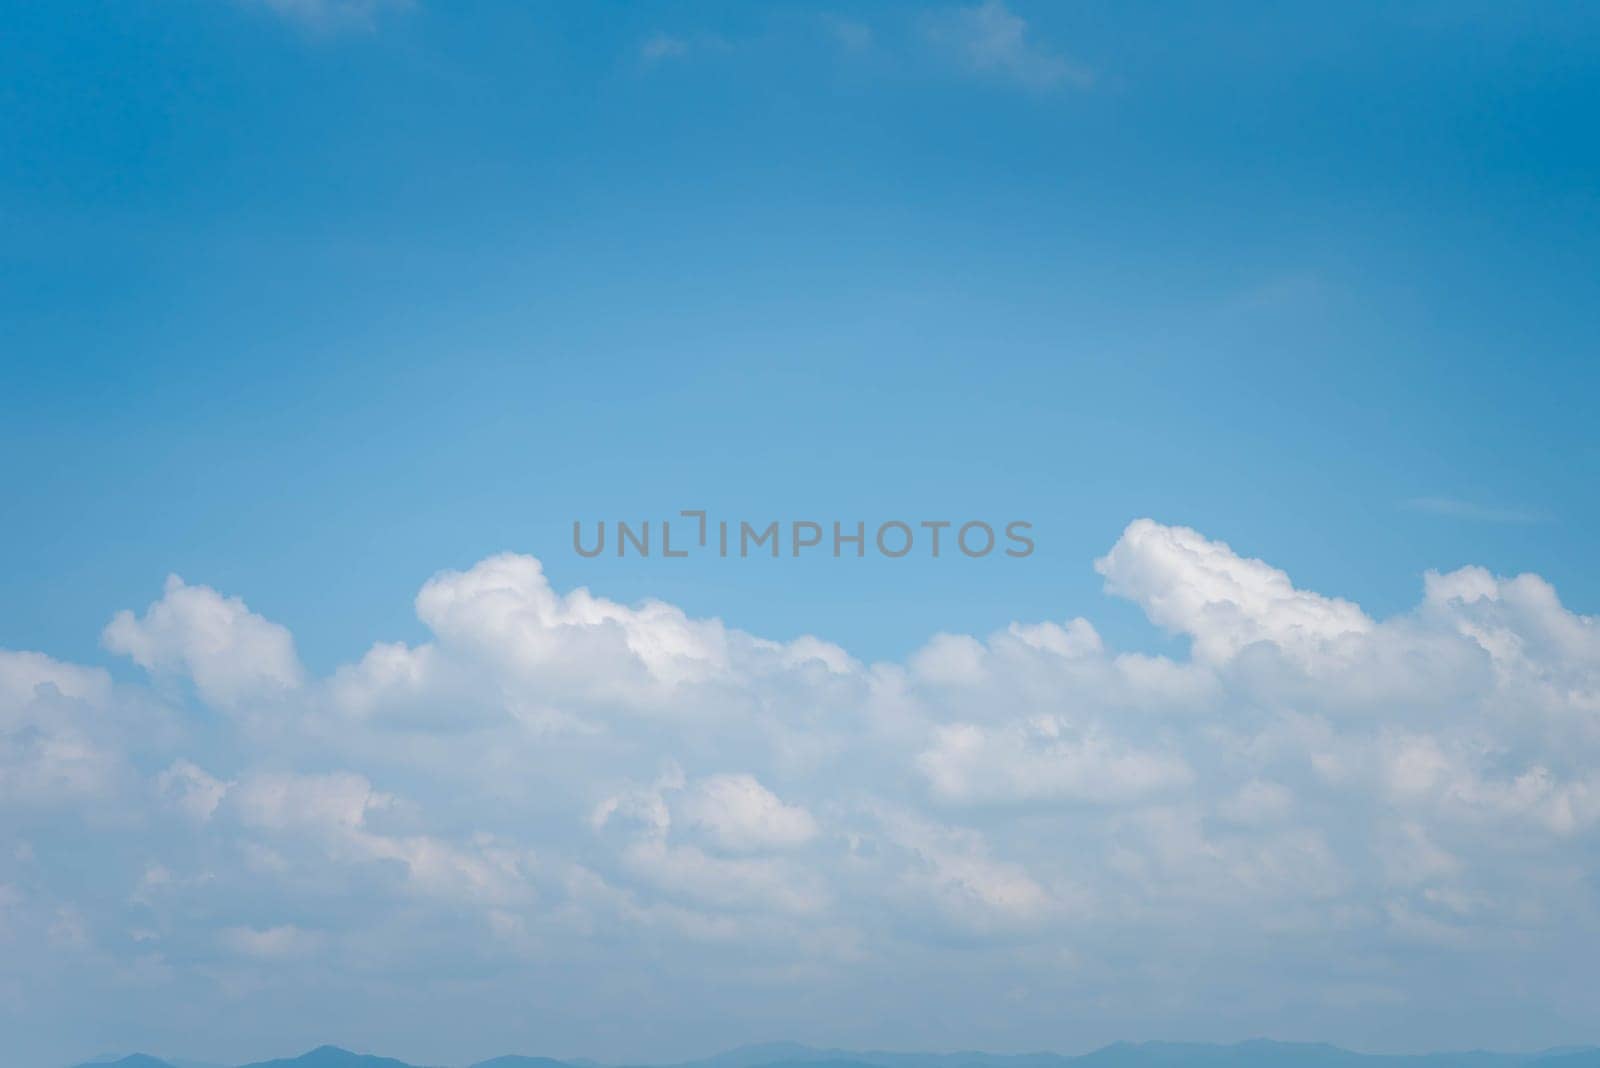 Cloudscape of natural sky with blue sky and white clouds in the sky use for wallpaper background in concept dreamy, heaven or freedom in life